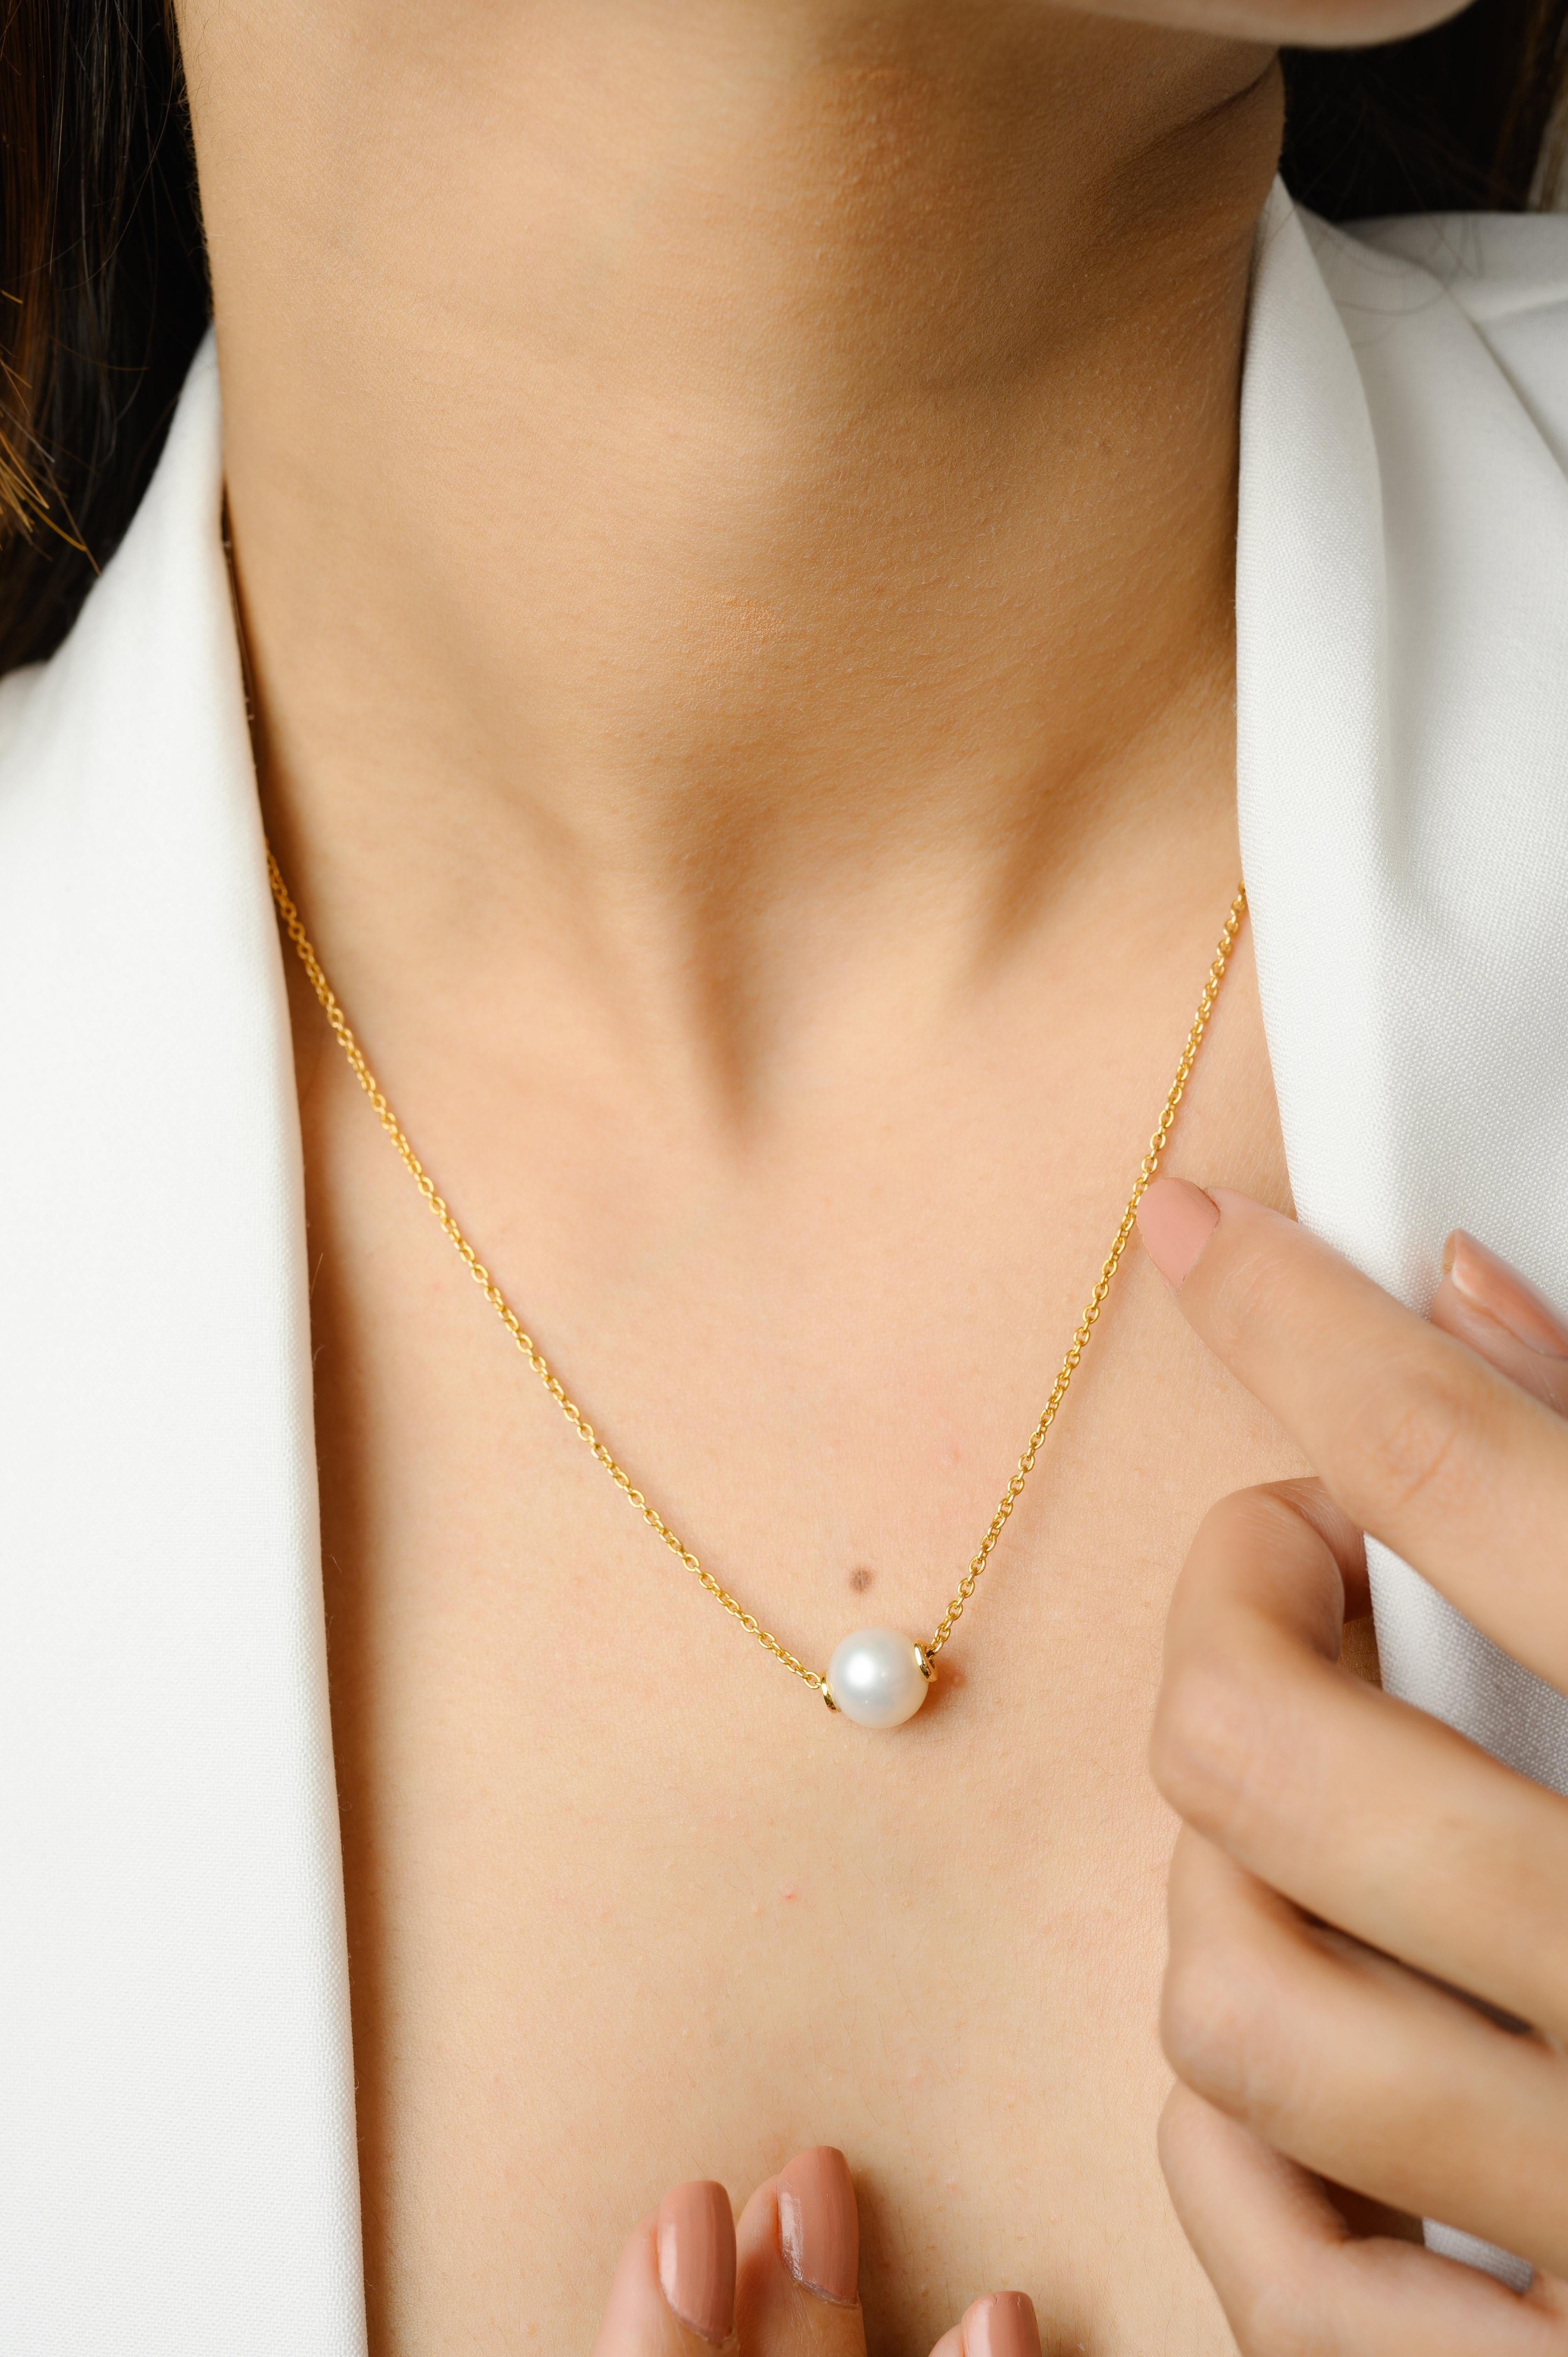 Modern 5 Carat Single Pearl Chain Necklace in 18K Gold with round bead pearl. This stunning piece of jewelry instantly elevates a casual look or dressy outfit. 
Pearl symbolizes purity, determination and perfection. 
Designed with round pearl bead